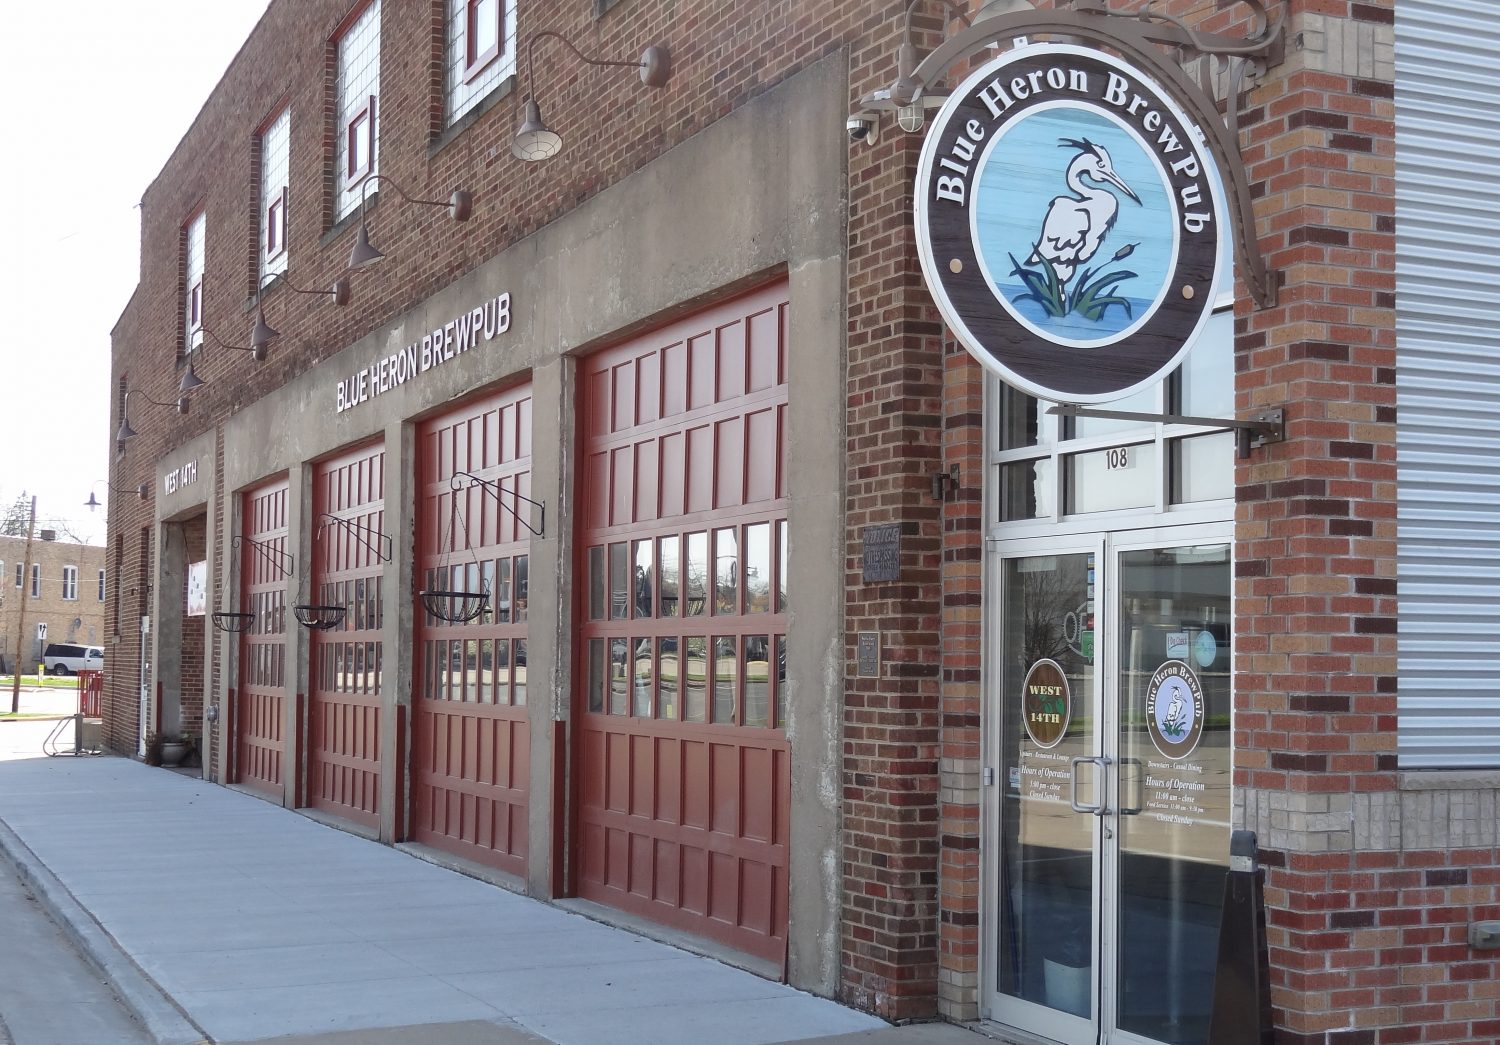 The Blue Heron BrewPub is one of many local businesses participating in this year's Bicycle Discount Program.